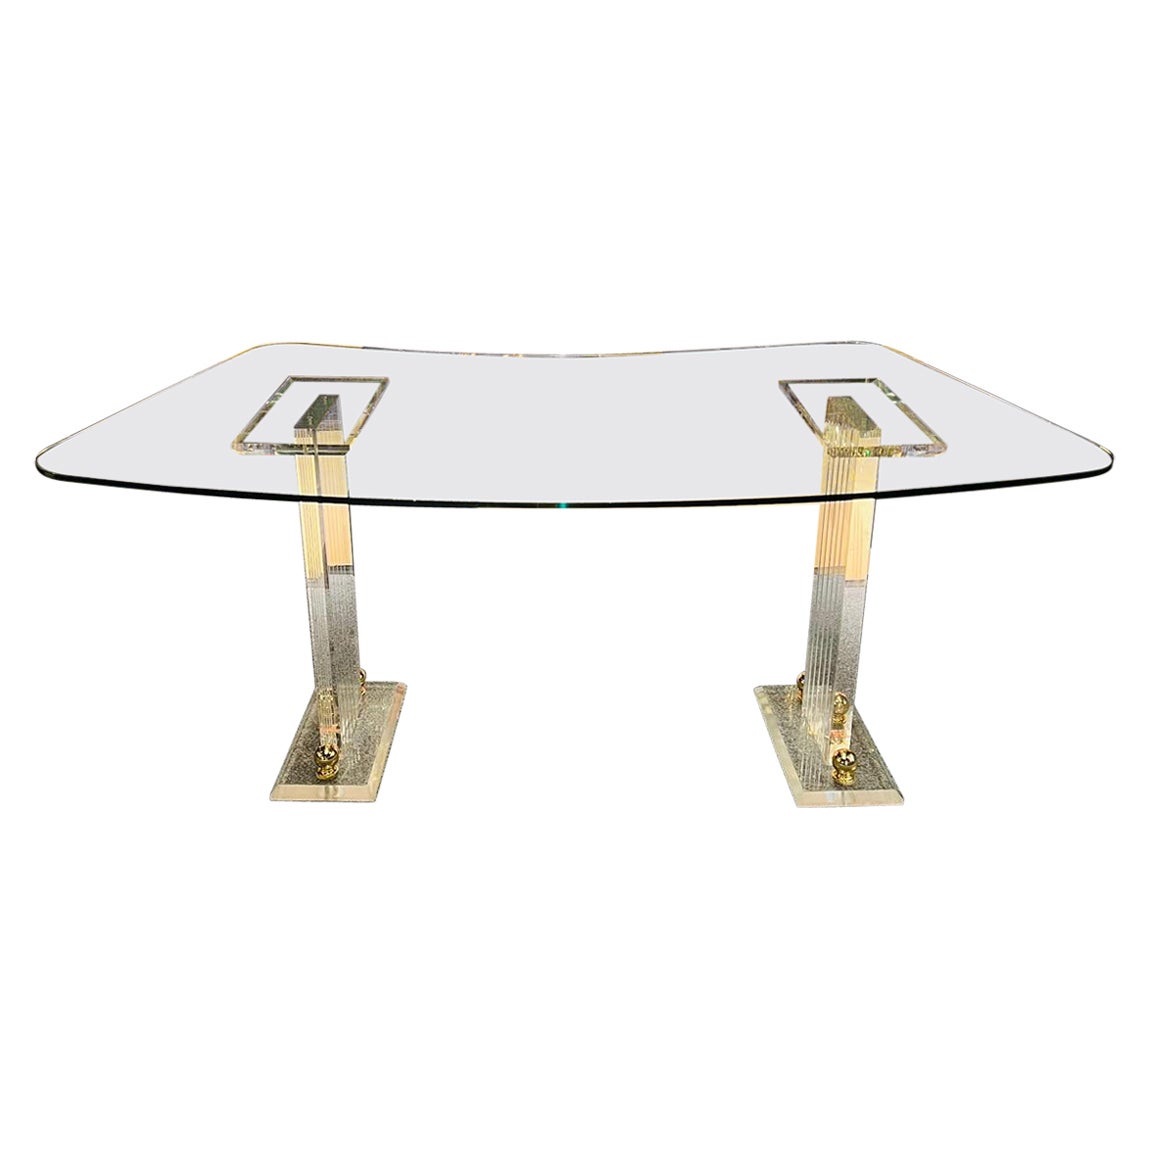 High Quality Acrylic Desk Stands on 2 Columns / Pillars with Massive Curved Top For Sale